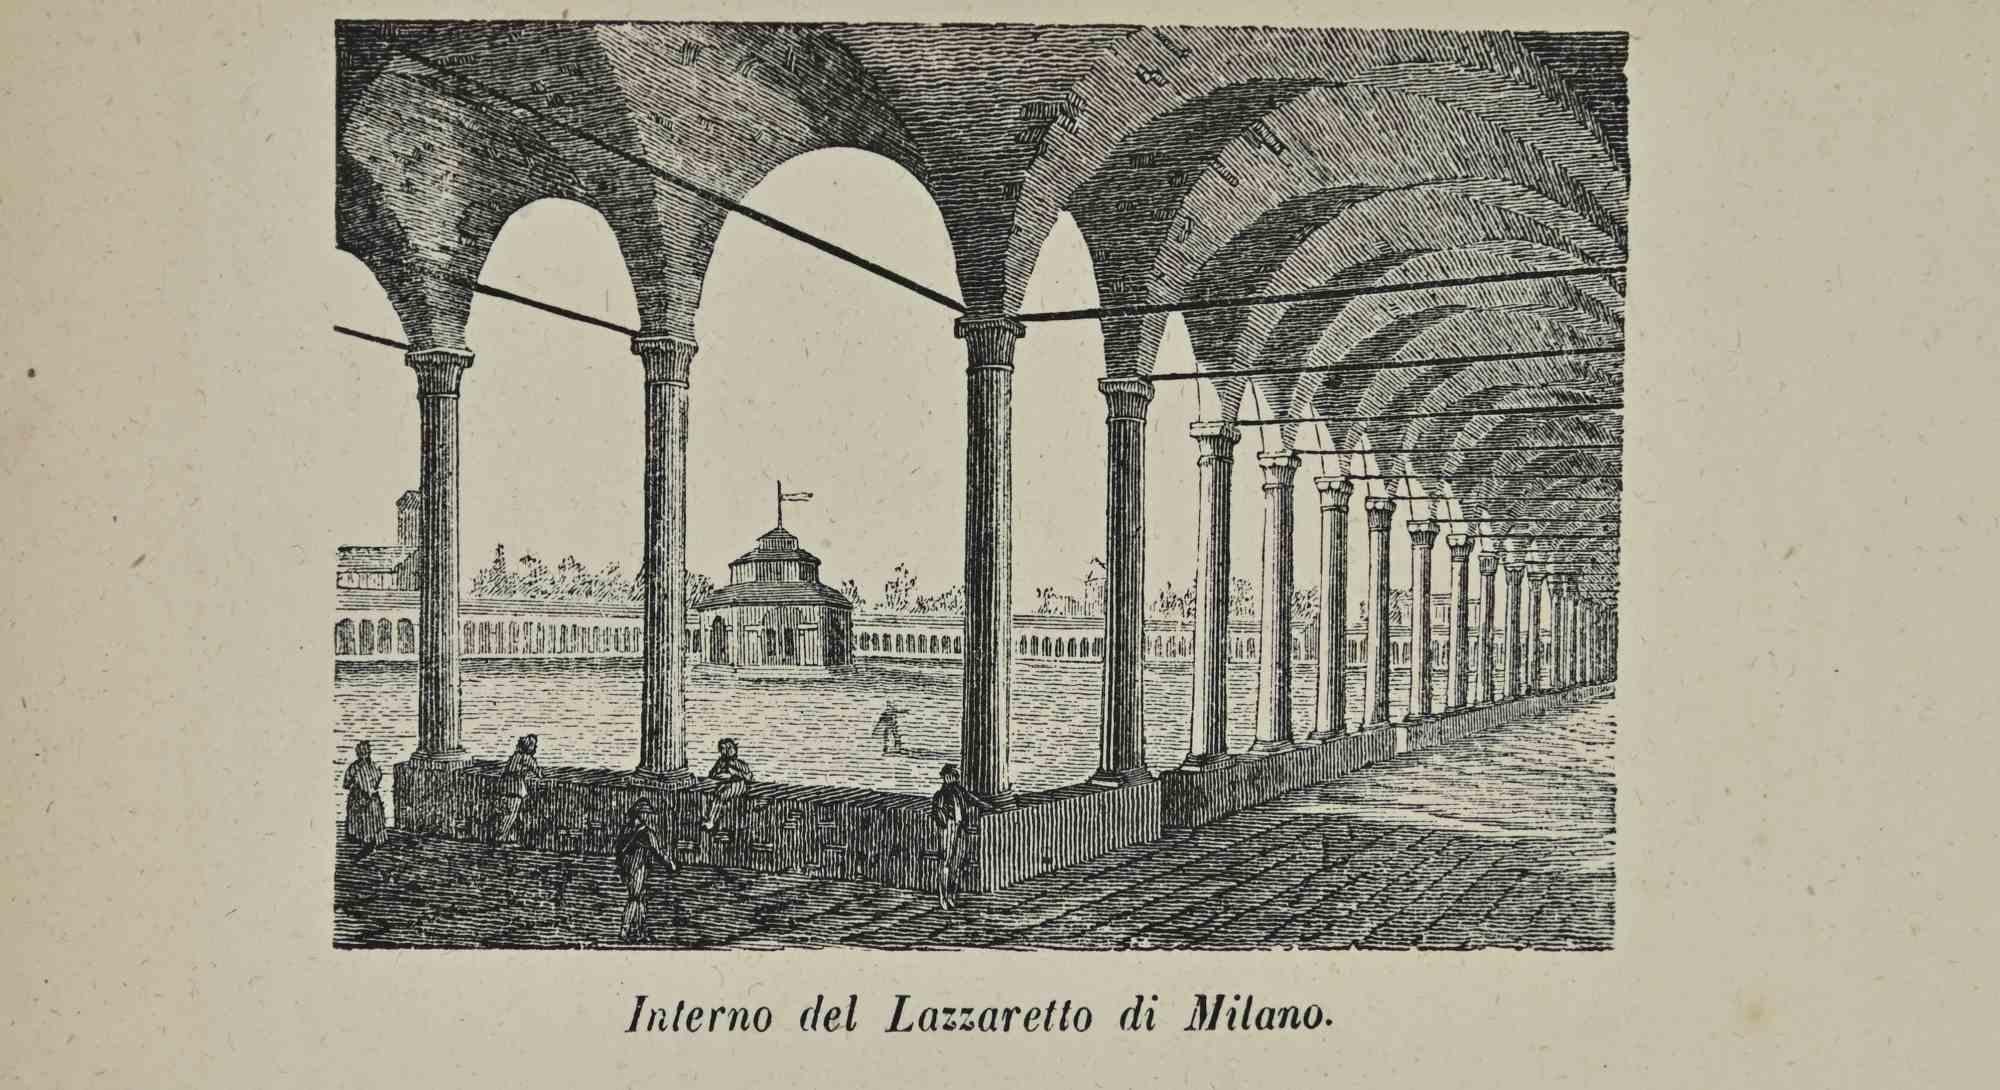 Uses and Customs - Interior of the Lazzaretto in Milan - Lithograph - 1862